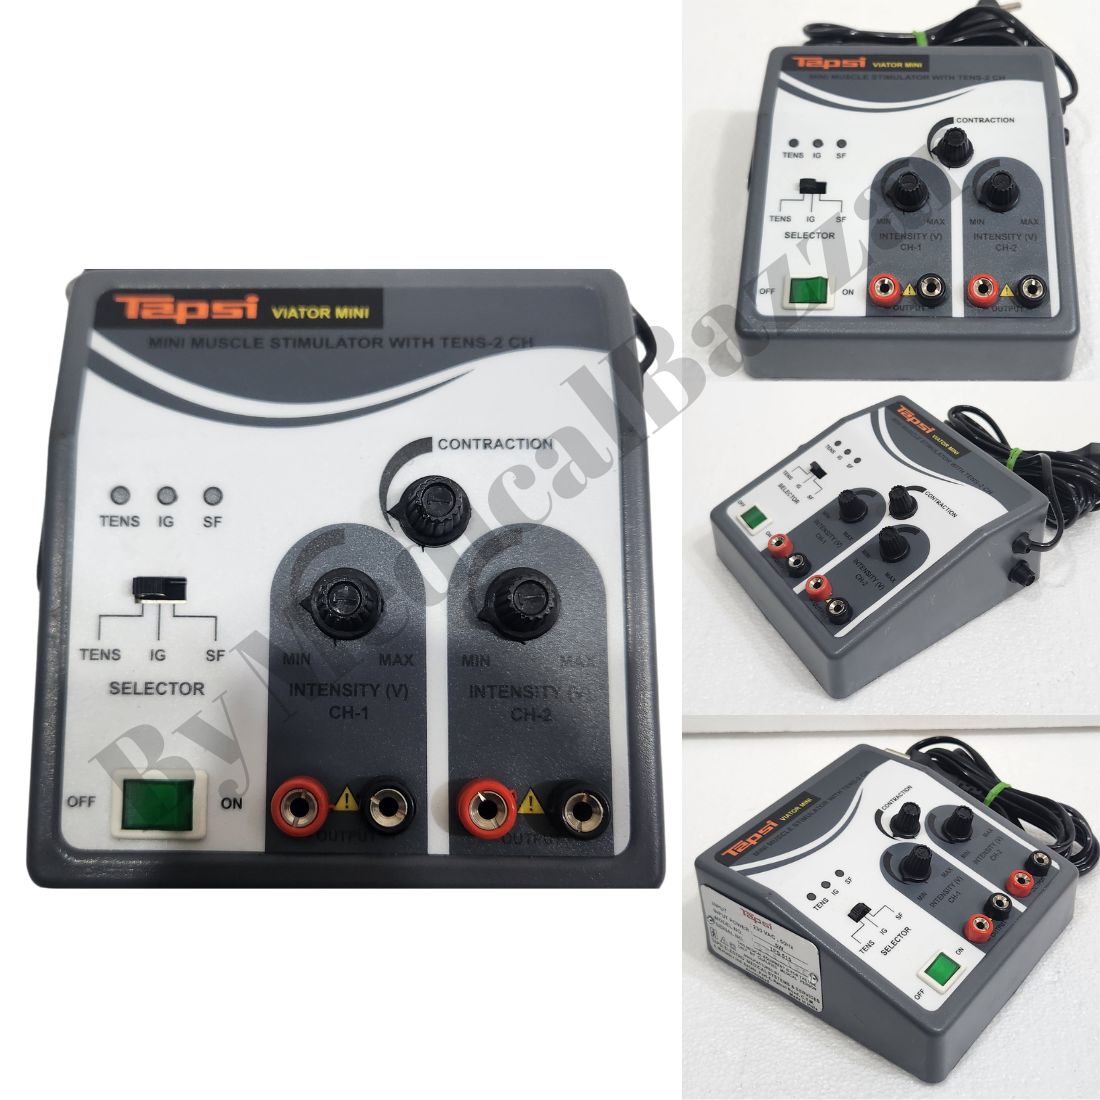 Tapsi MINI Muscle Stimulator (With 2 channel TENS)